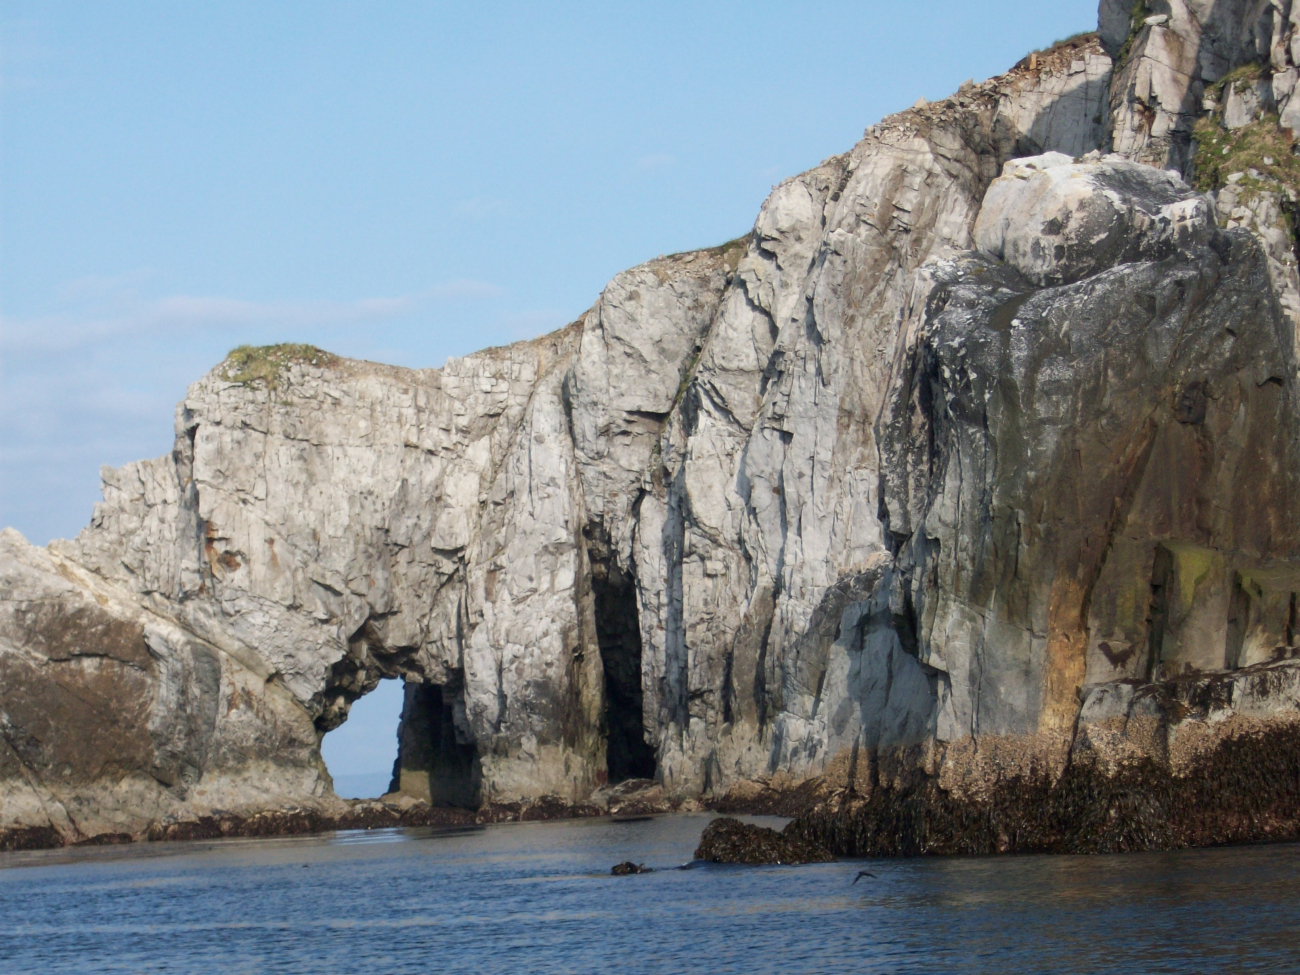 A natural bridge on the rocky shores of the Shumagin Islands